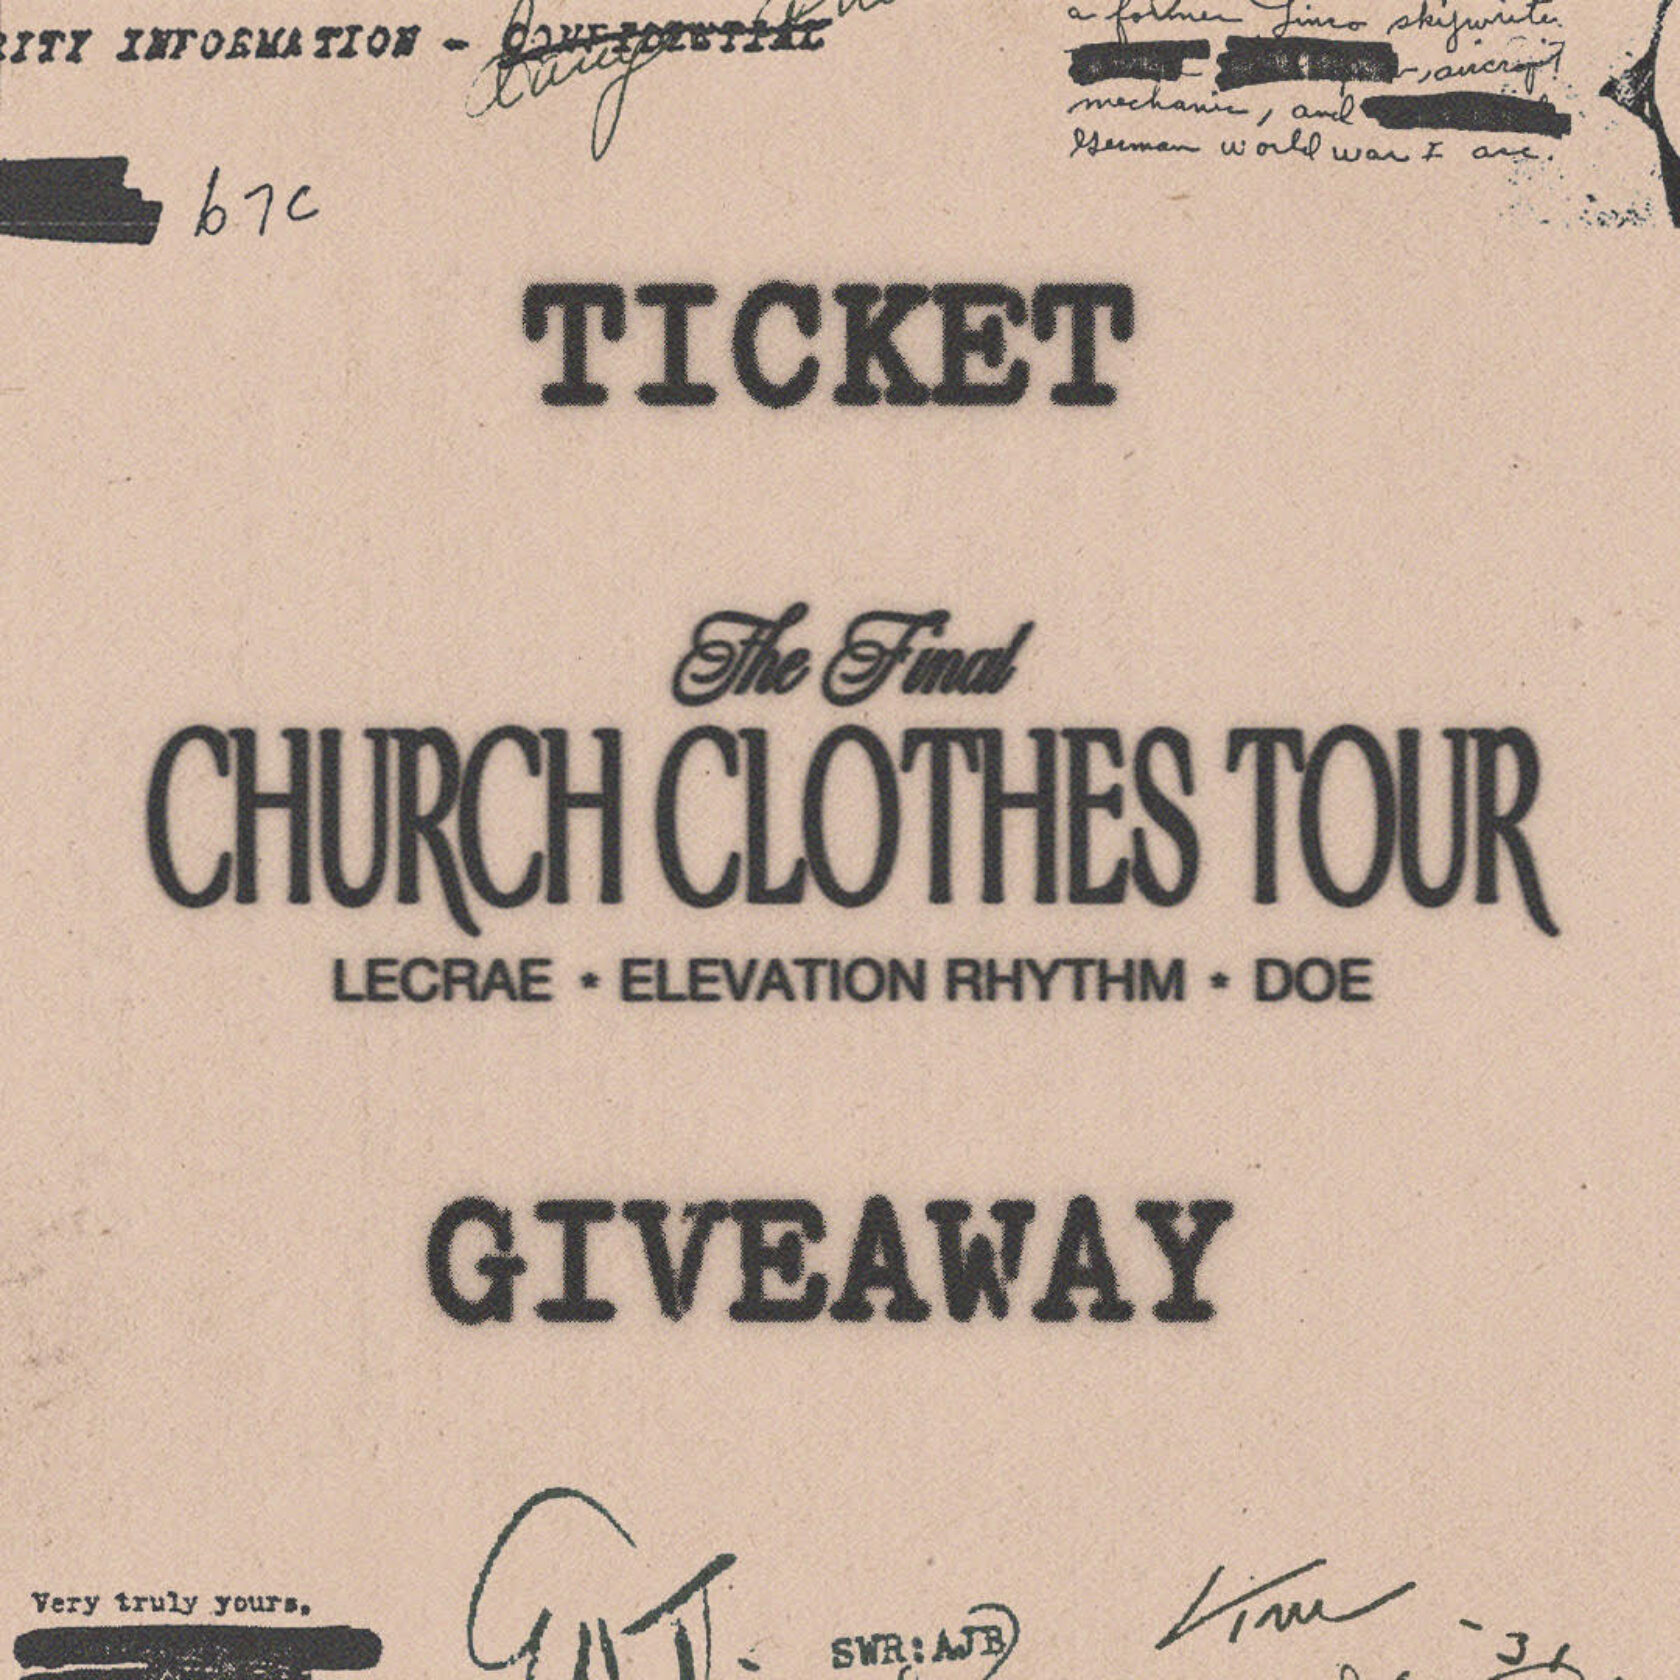 The Final Church Clothes Tour Ticket Giveaway